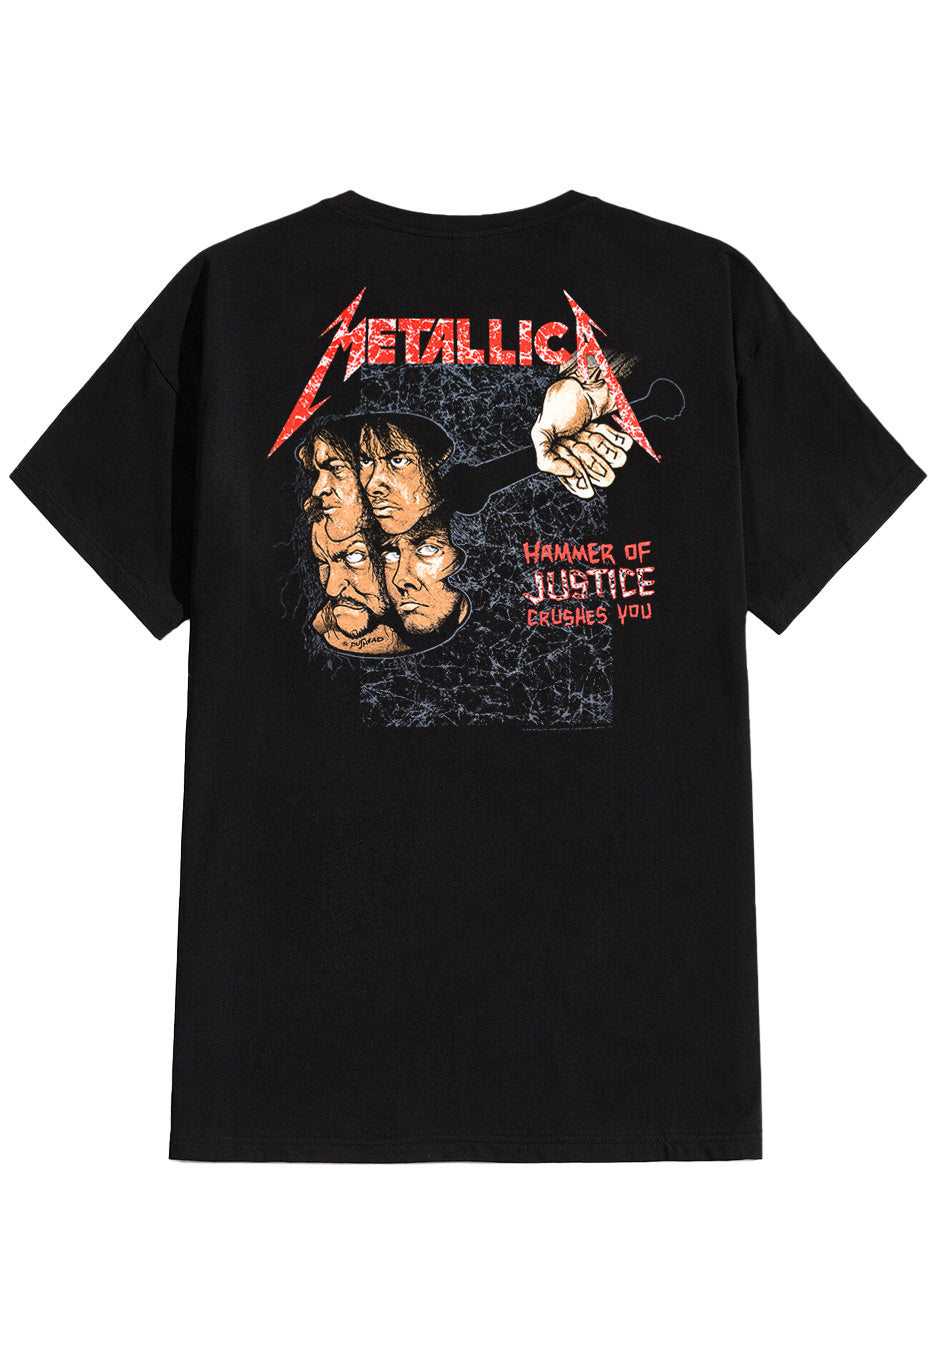 Metallica - And Justice For All (Original) - T-Shirt